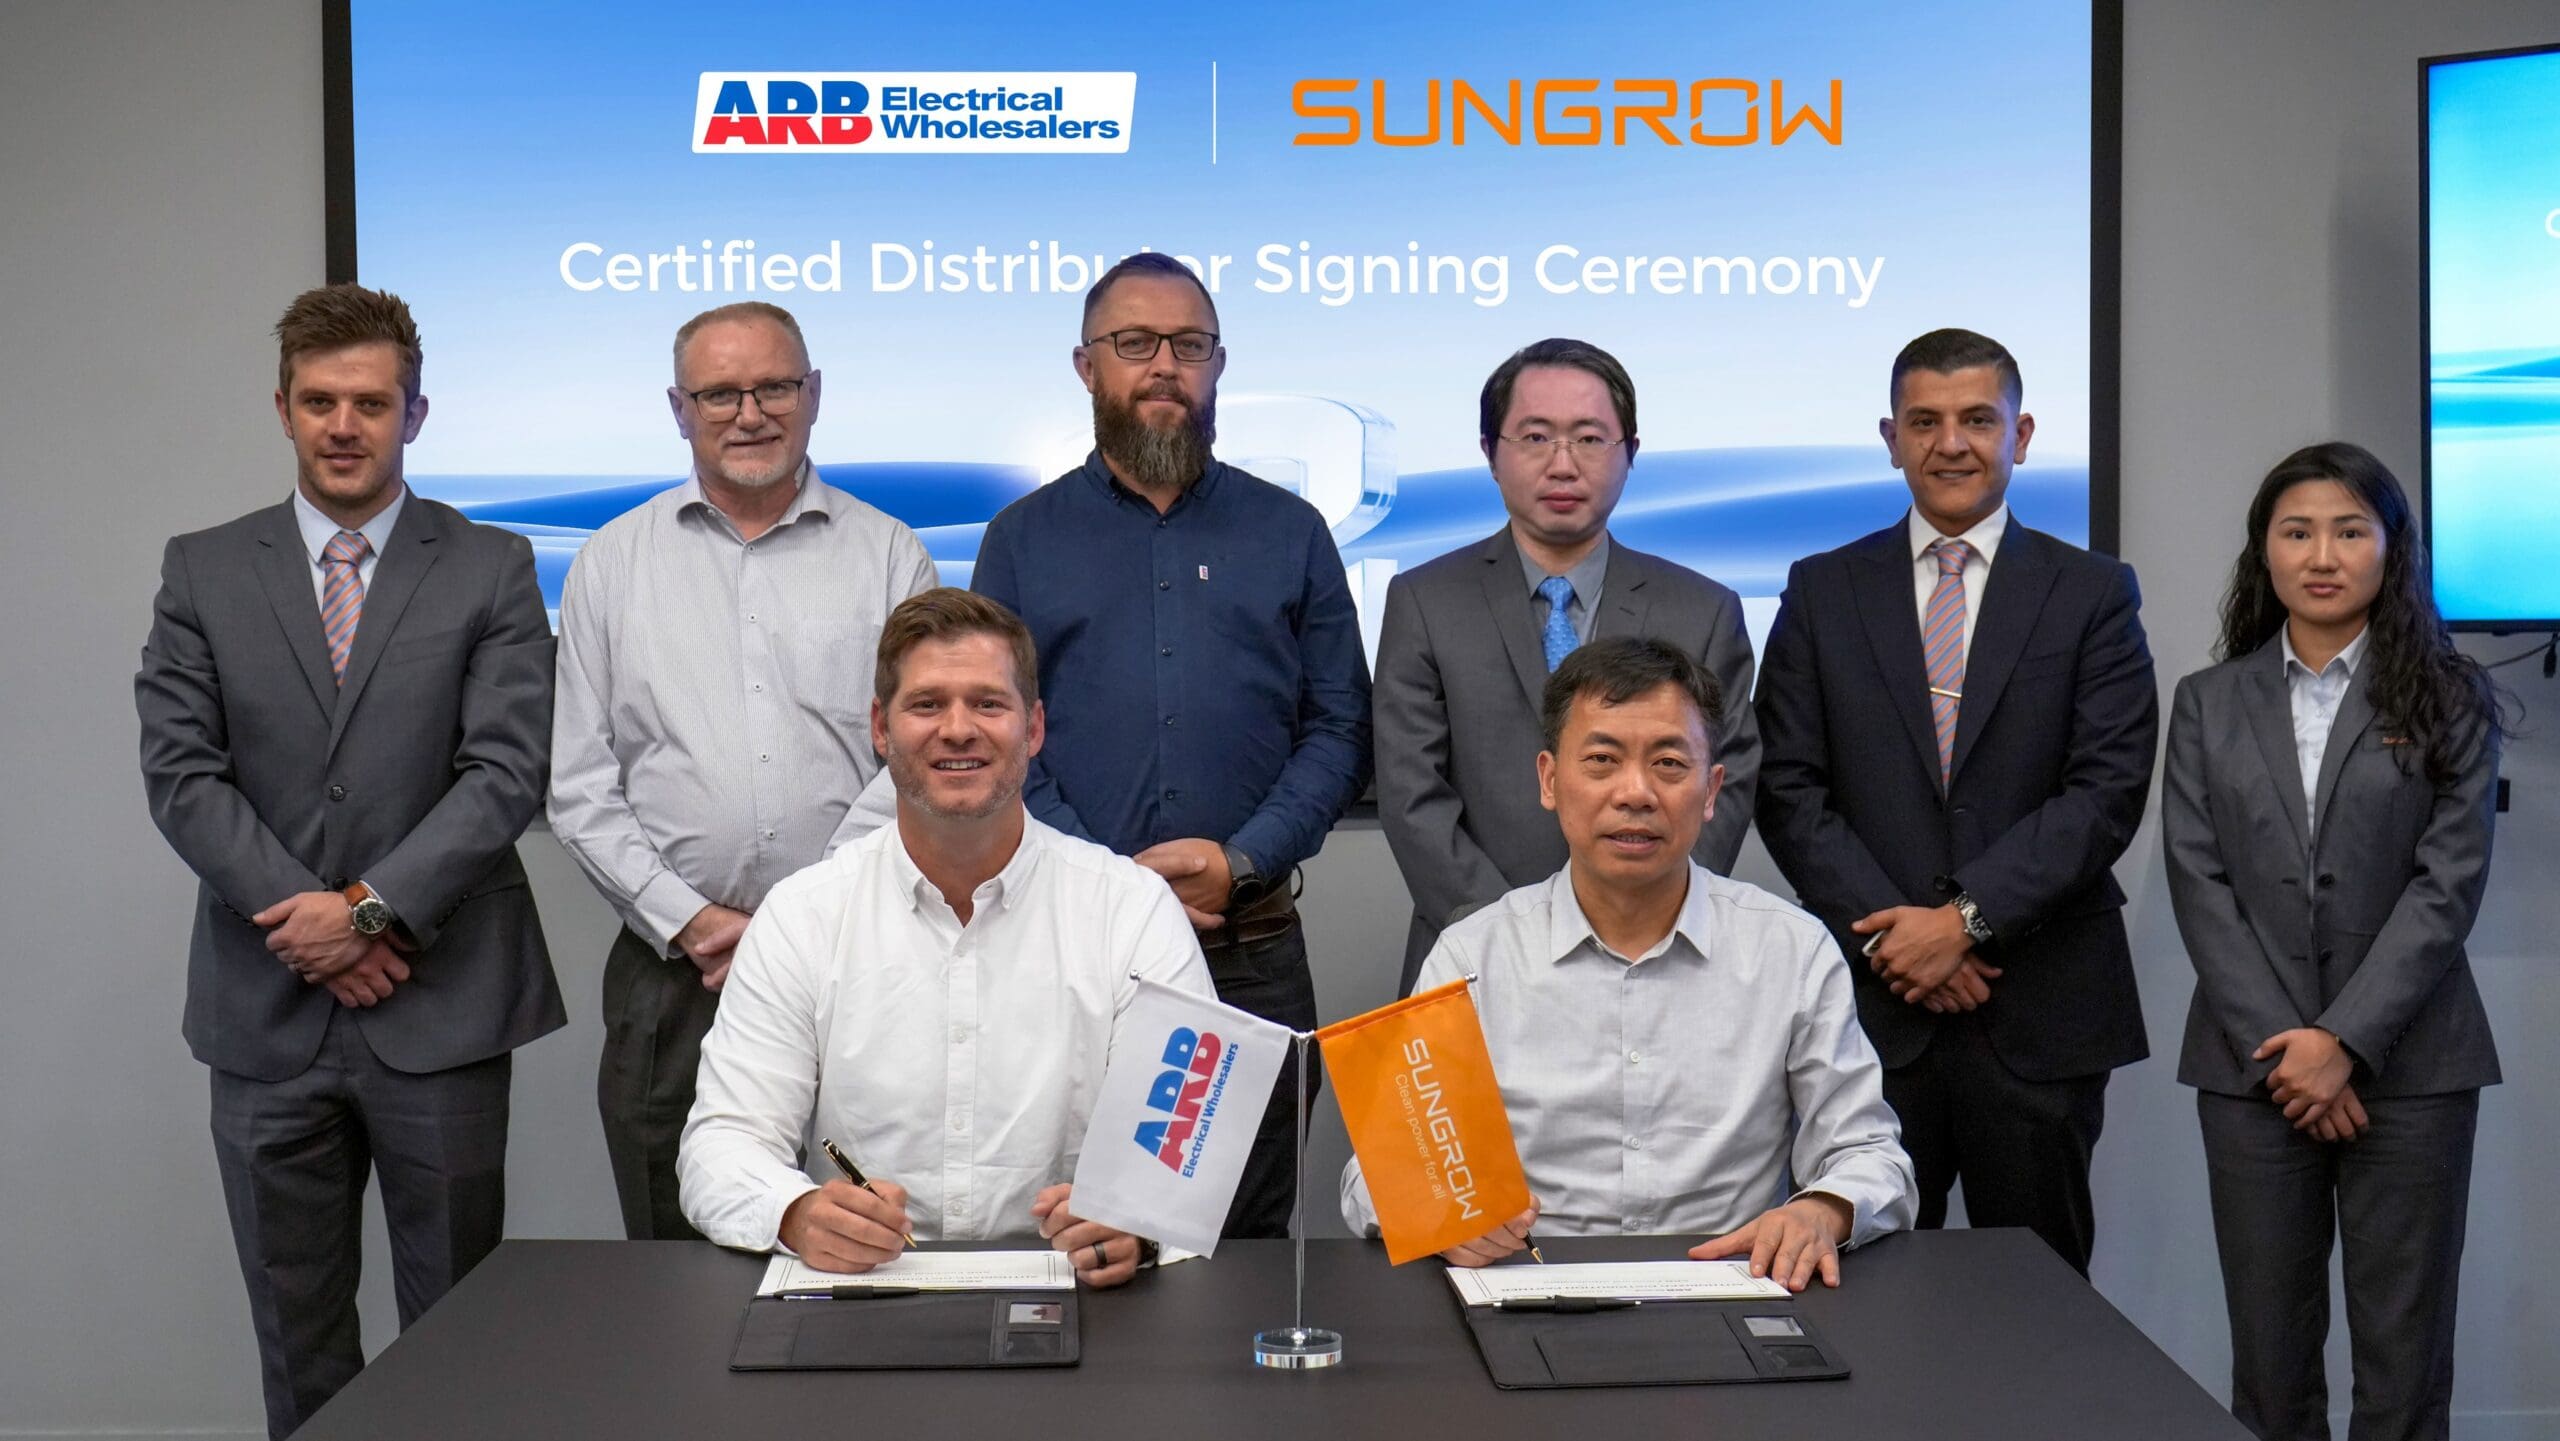 Sungrow Signs Distribution Agreements with Herholdt’s and ARB in South Africa